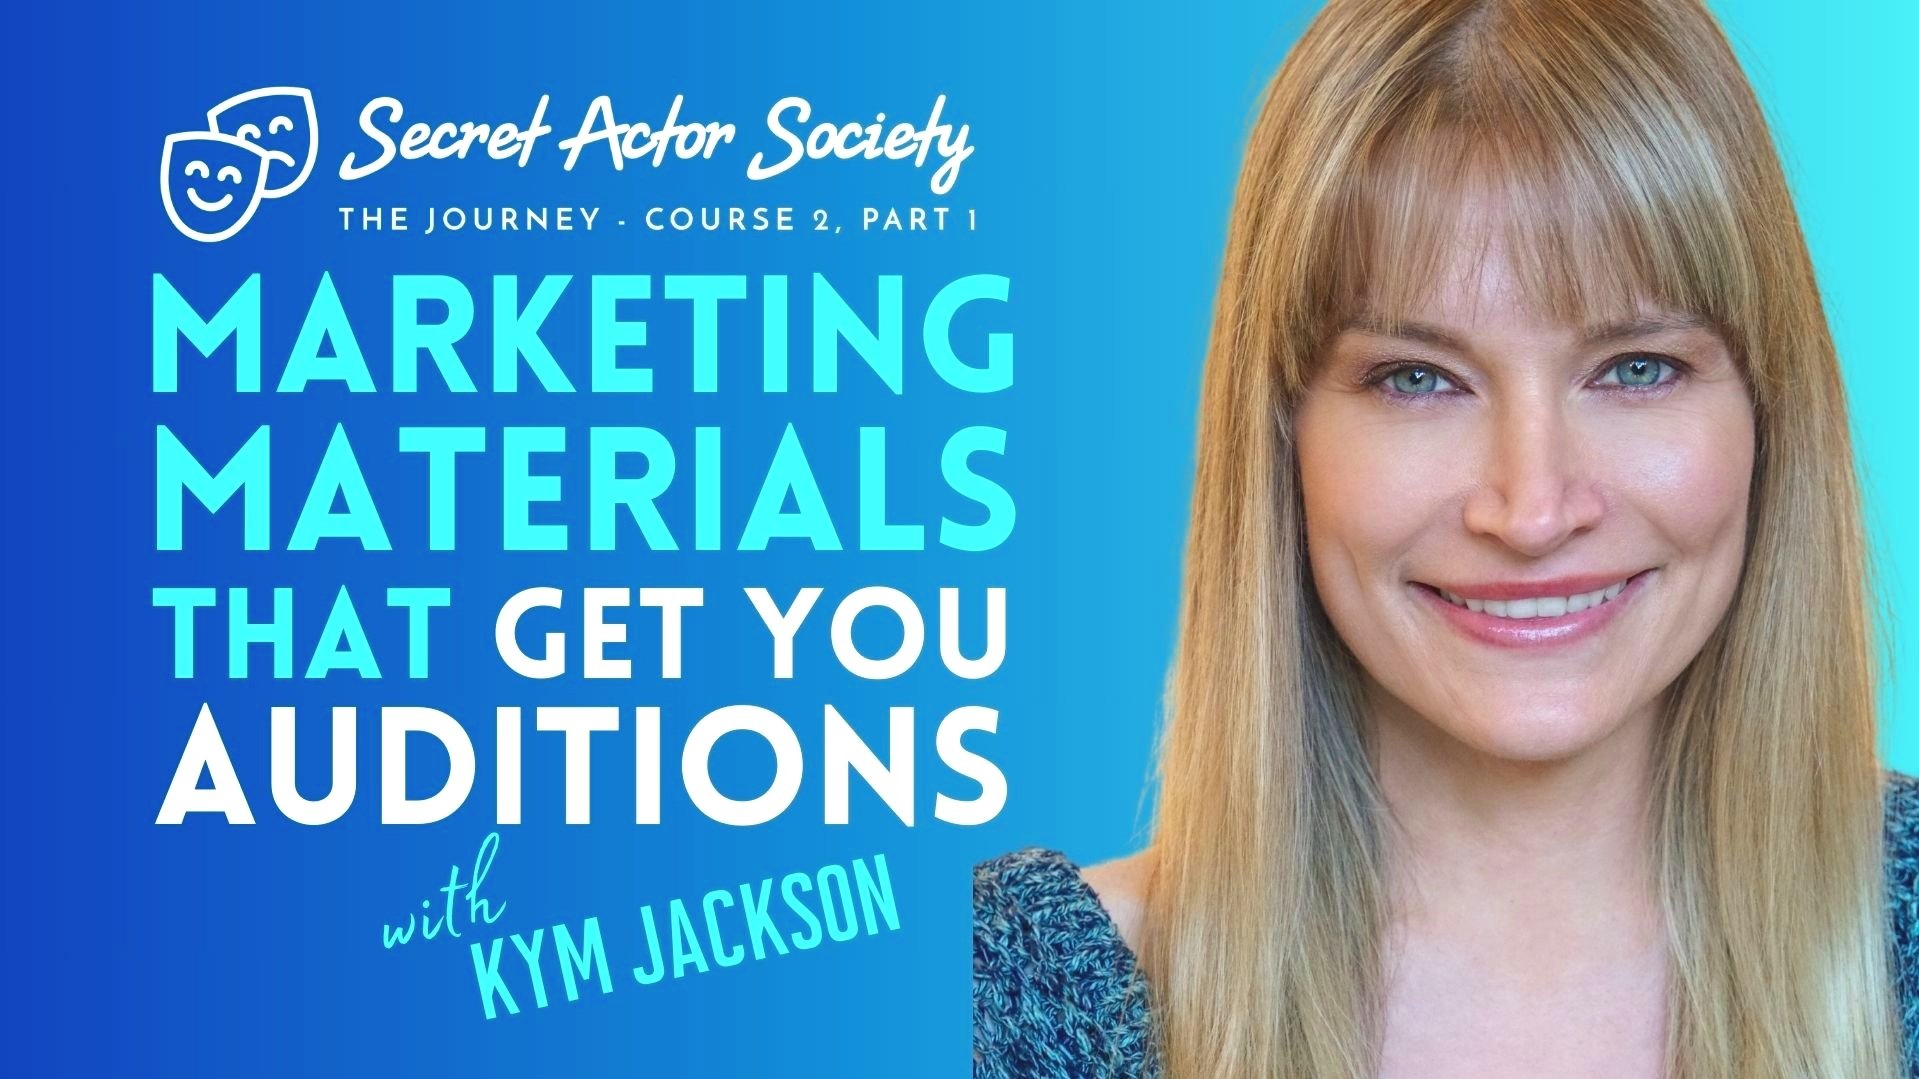 Marketing Materials That Get You Auditions (Copy)